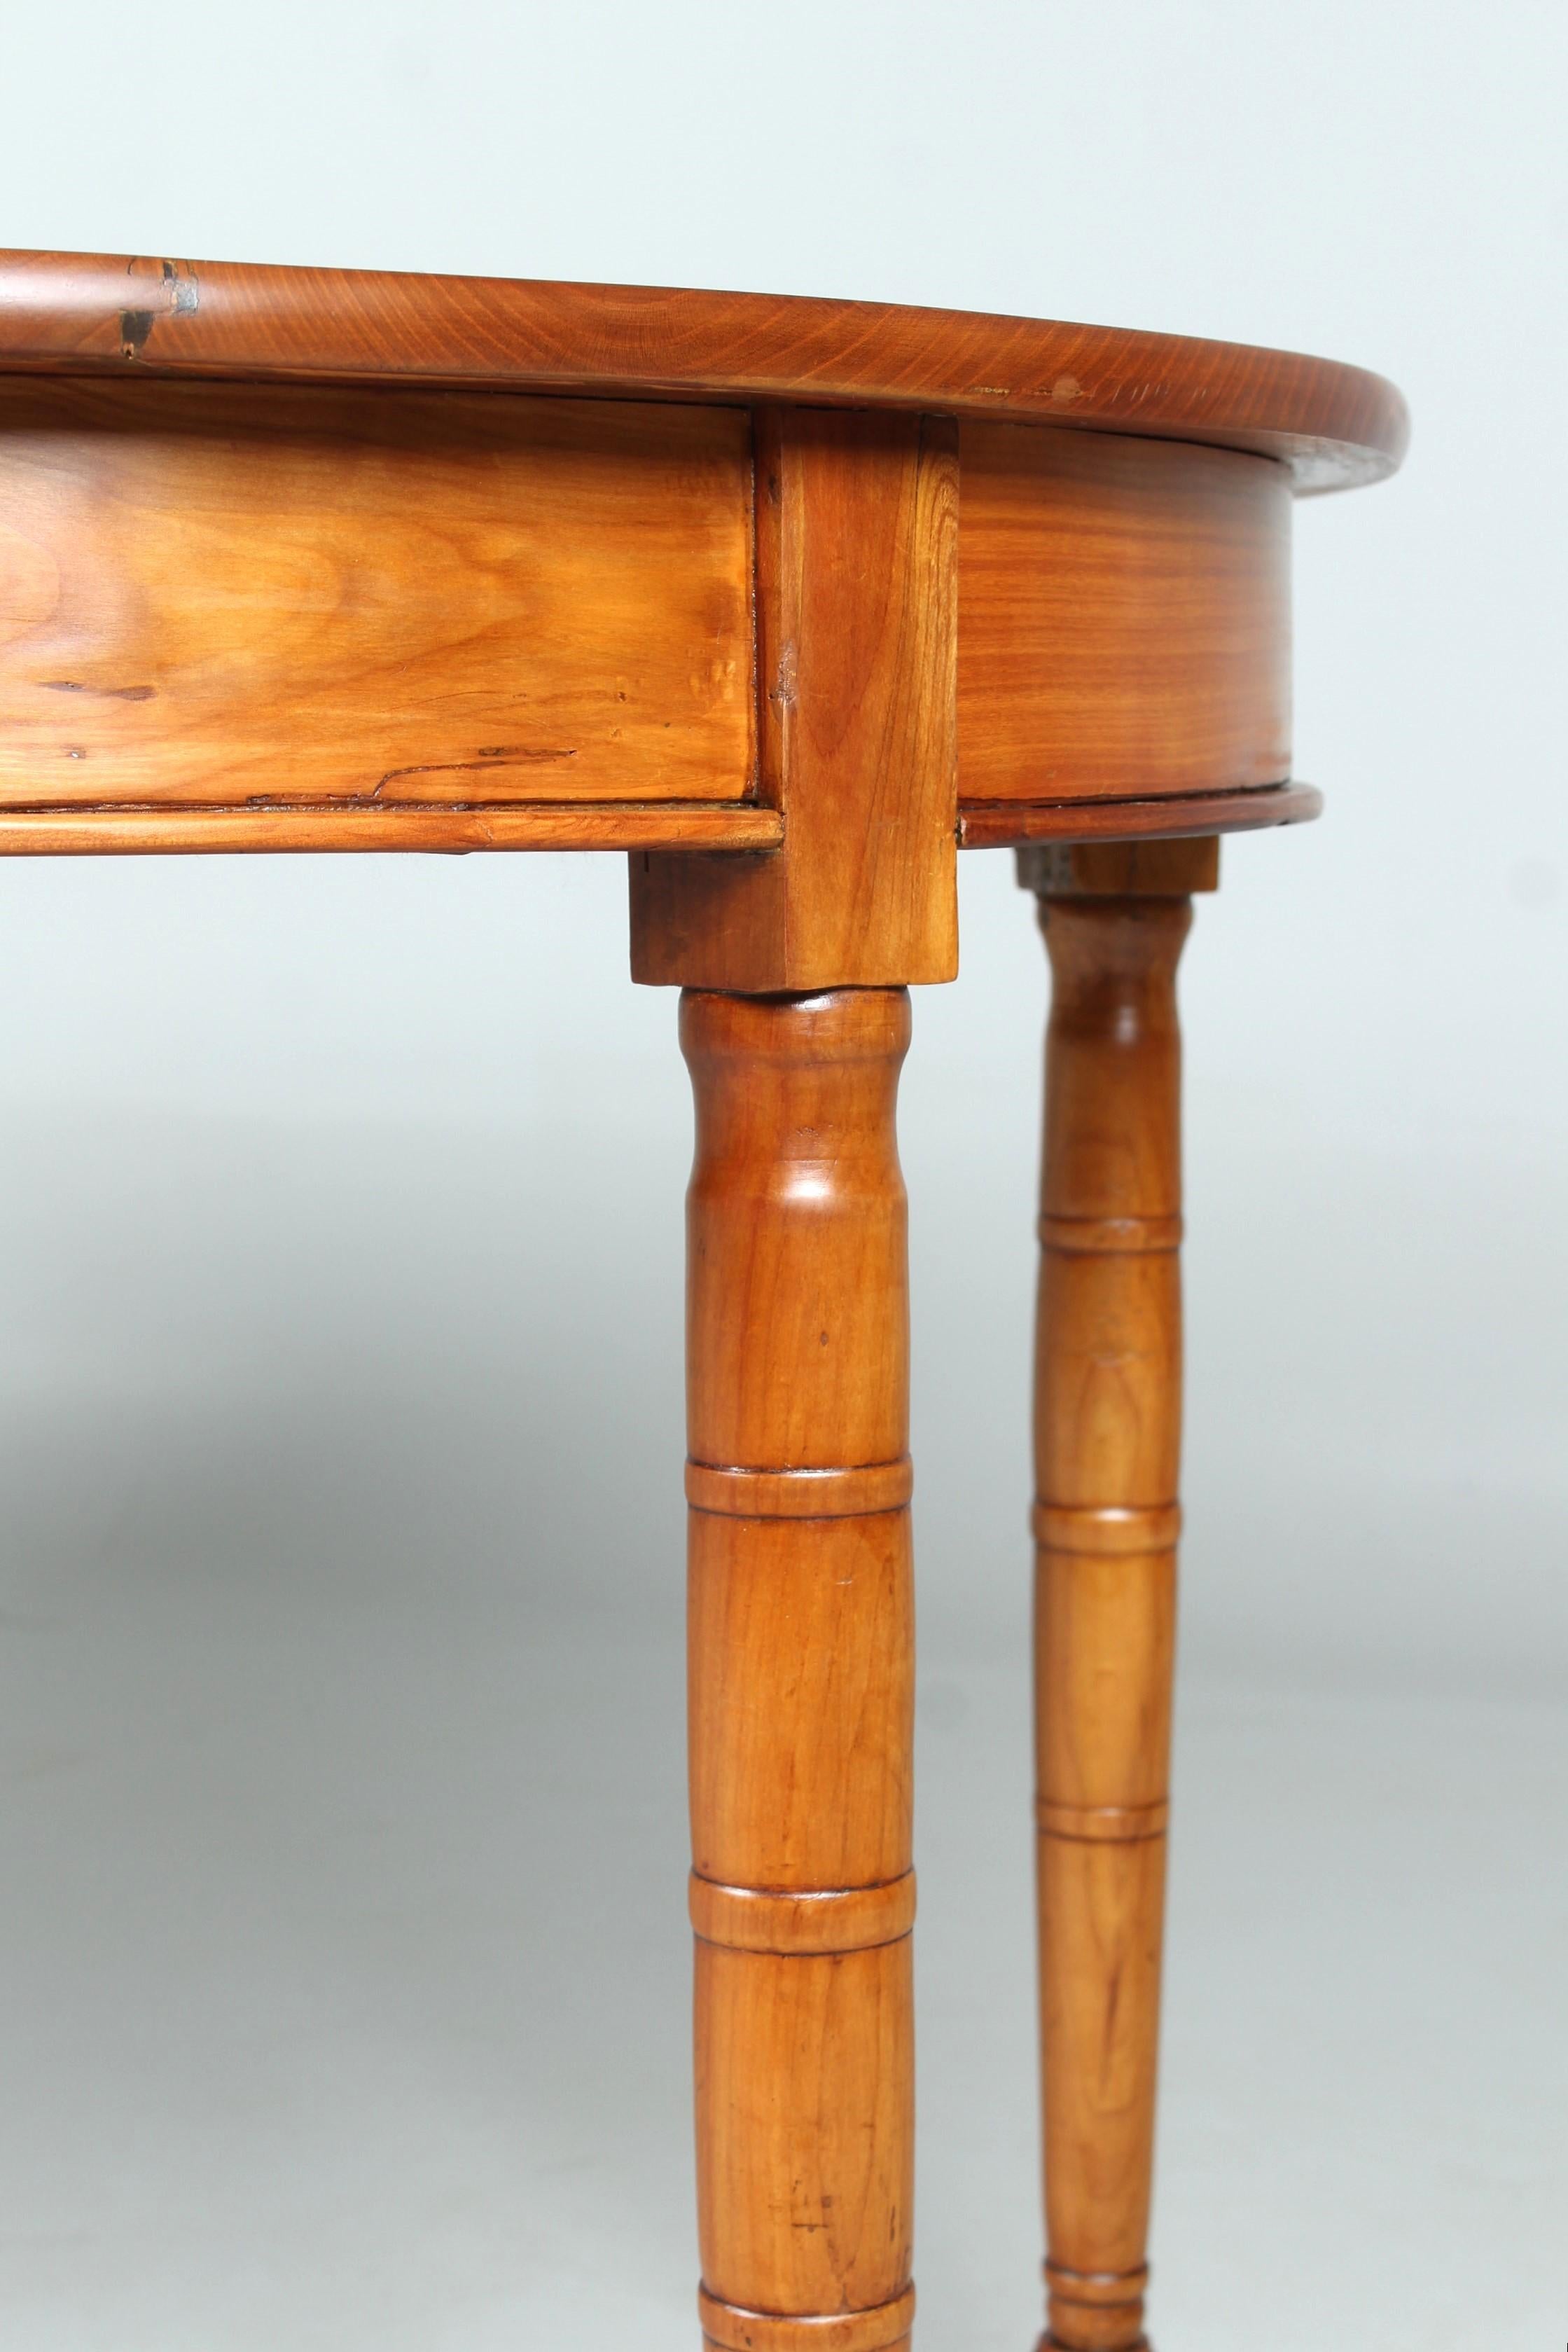 Extendable Cherrywood Dining Table, Germany, Mid 19th Century For Sale 6